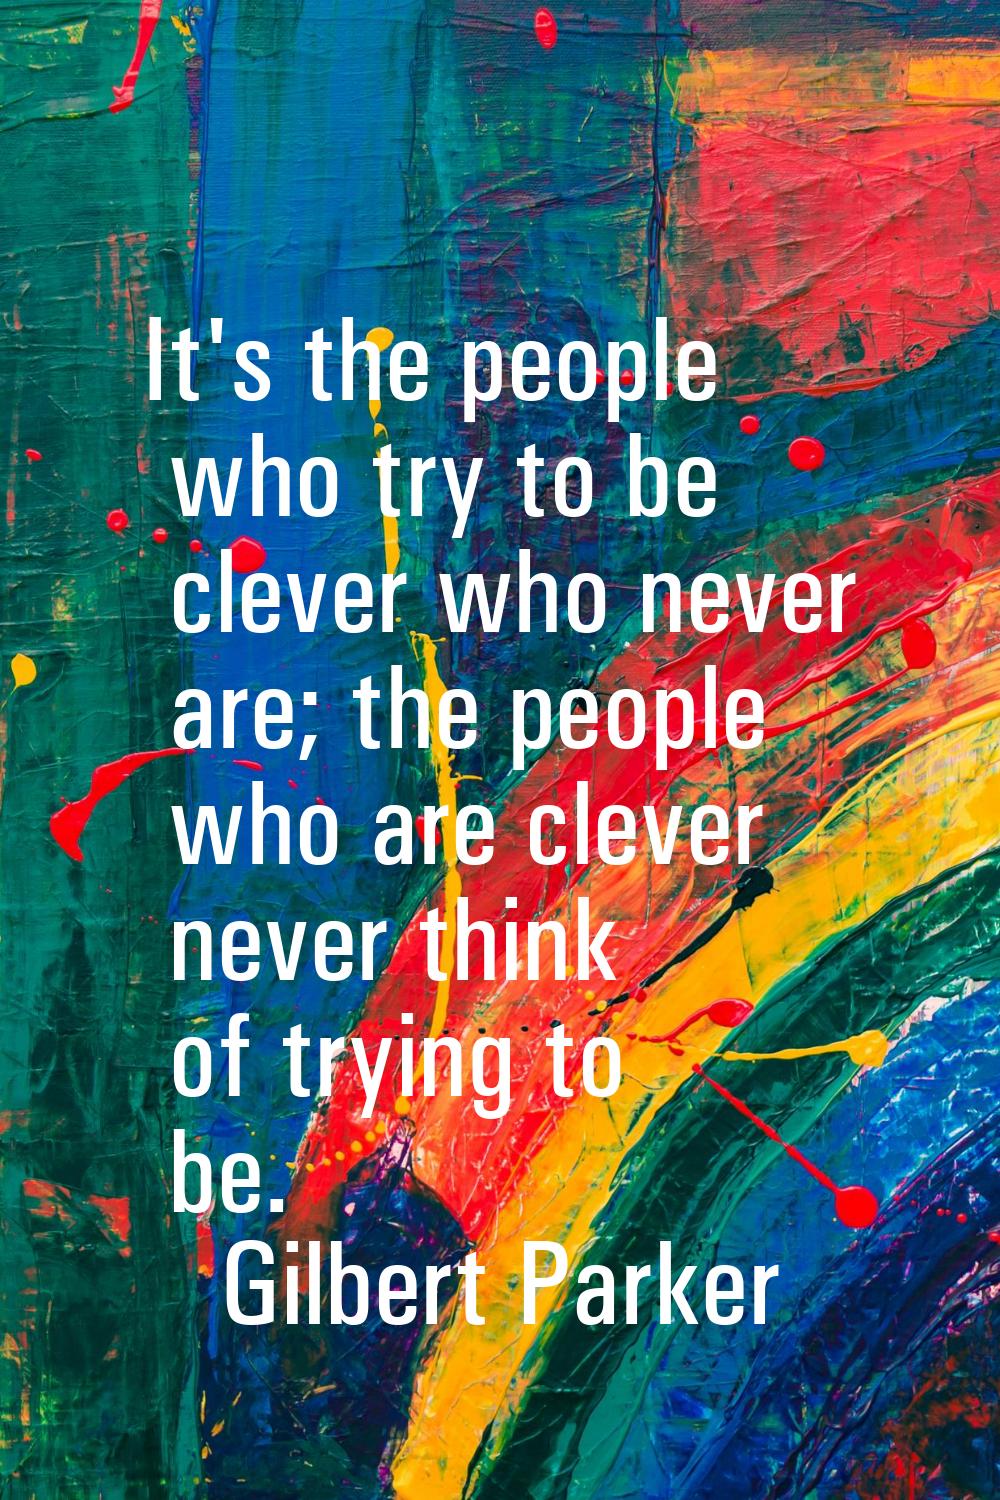 It's the people who try to be clever who never are; the people who are clever never think of trying